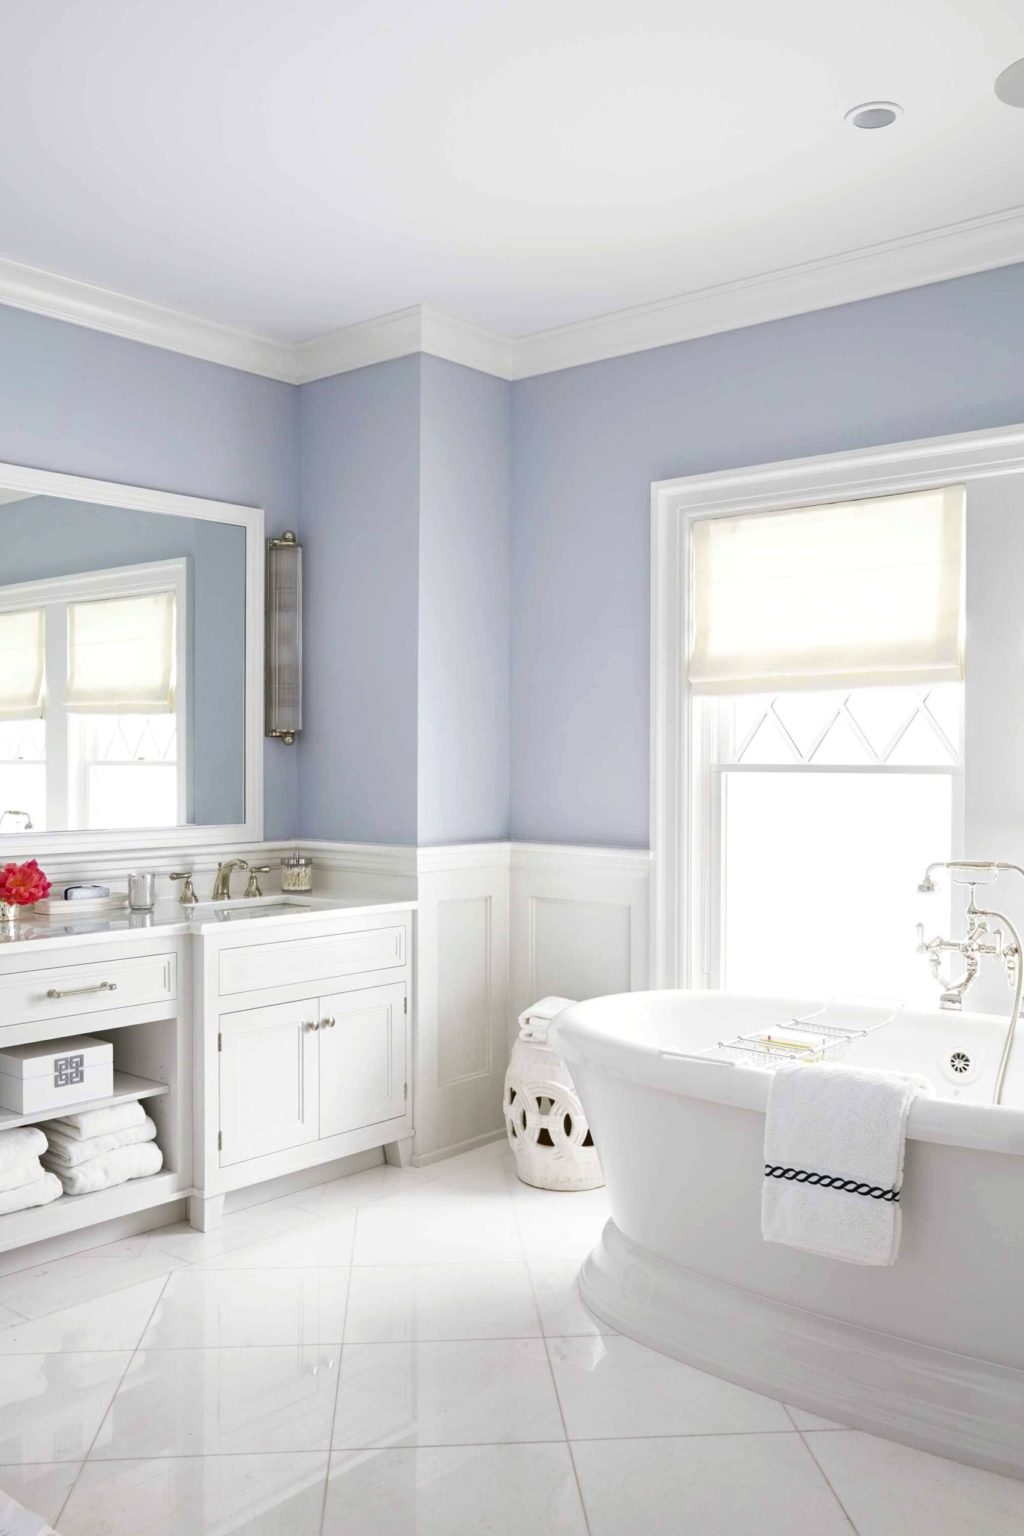 Use-of-paint-3-1024x1536 Top 10 Outdated Bathroom Design Trends to Avoid in 2022